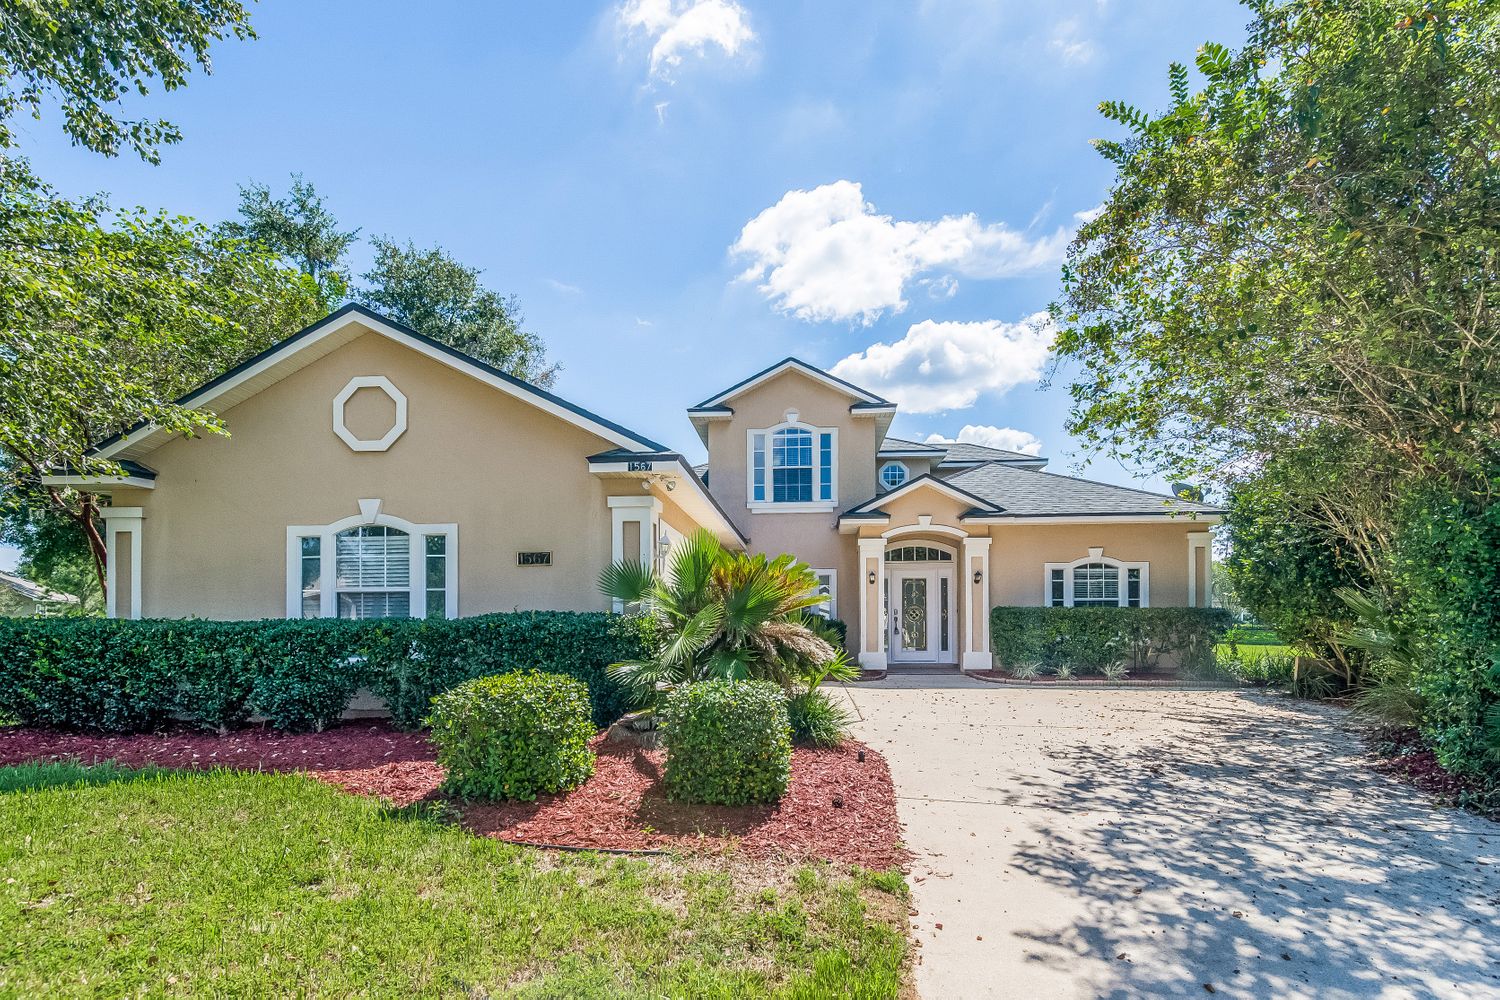 Beautiful home with landscaping and long driveway at Invitation Homes Jacksonville.